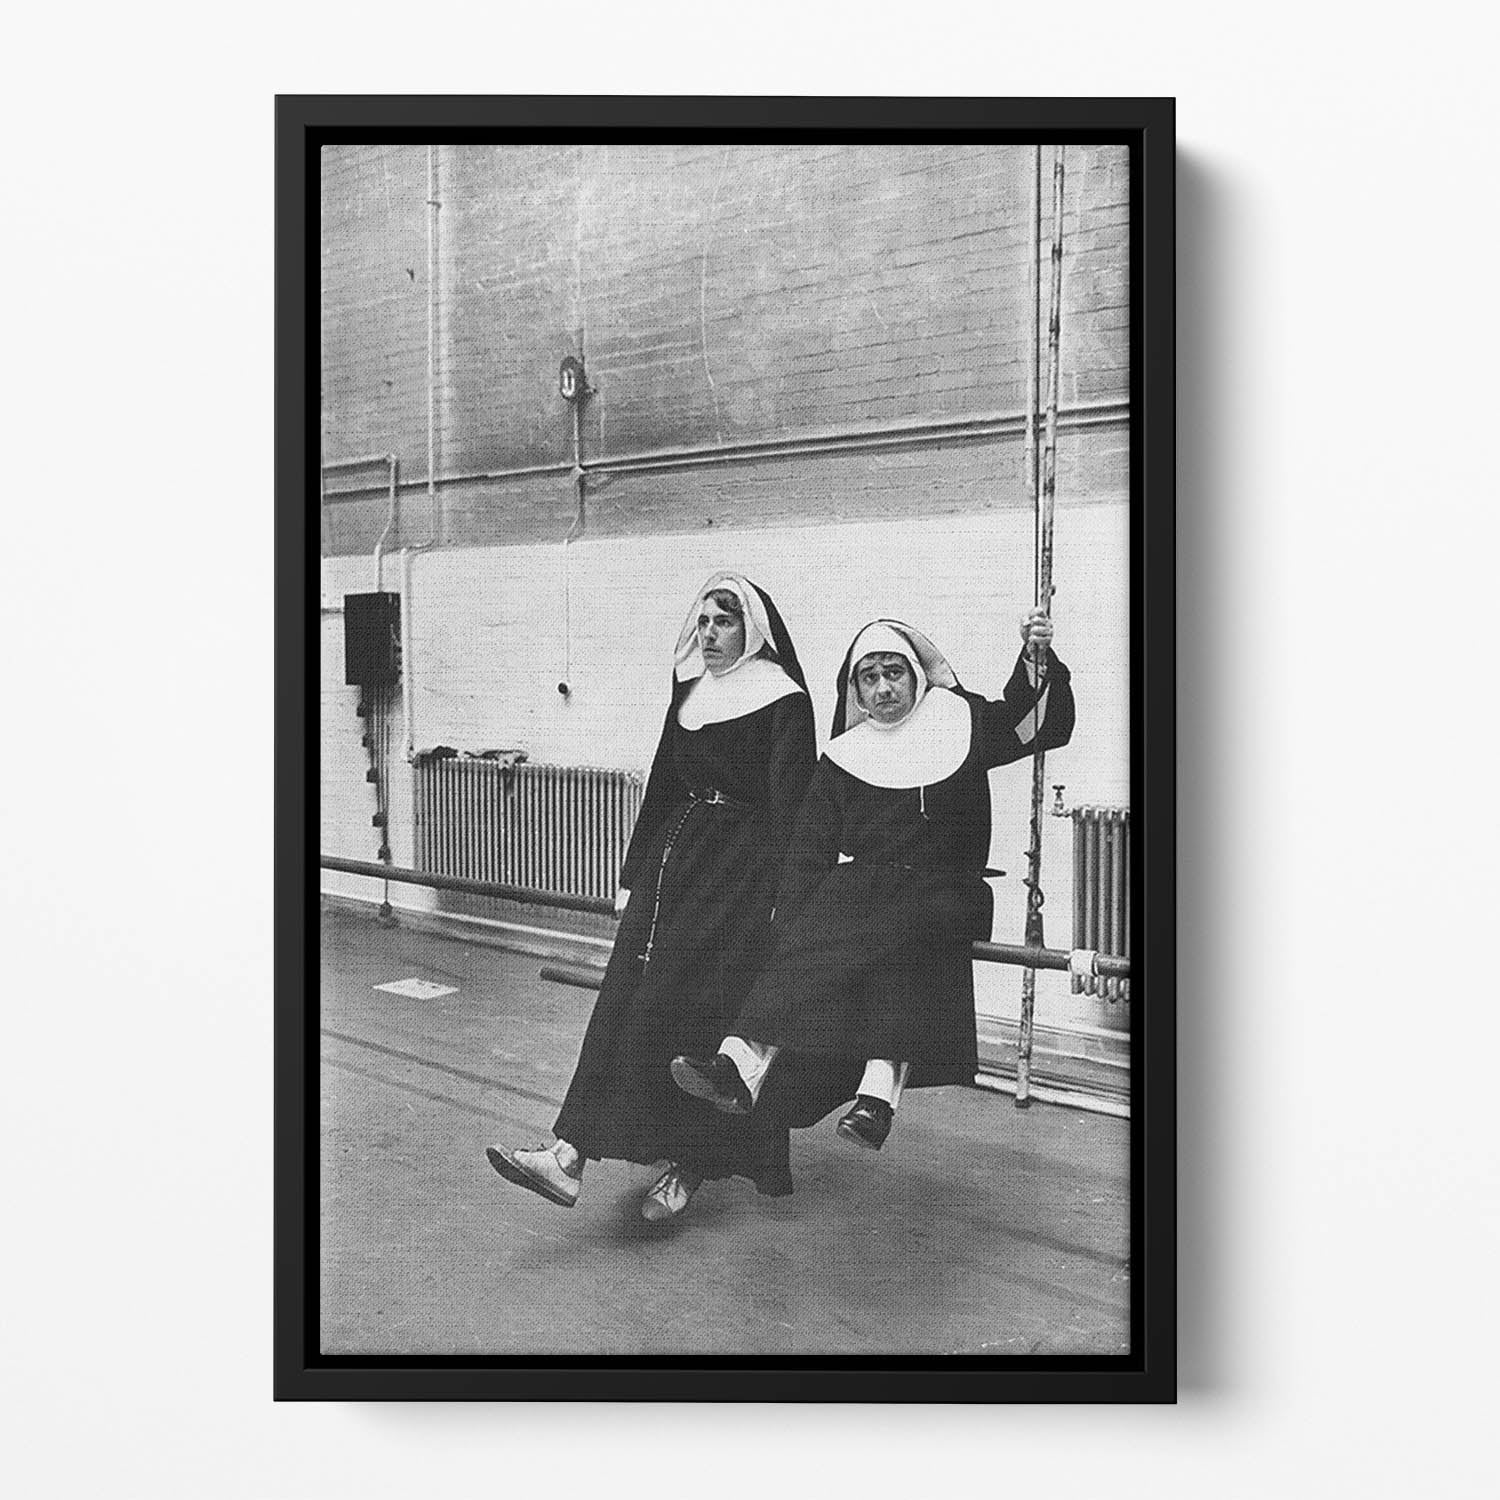 Peter Cook and Dudley Moore dressed as nuns Floating Framed Canvas